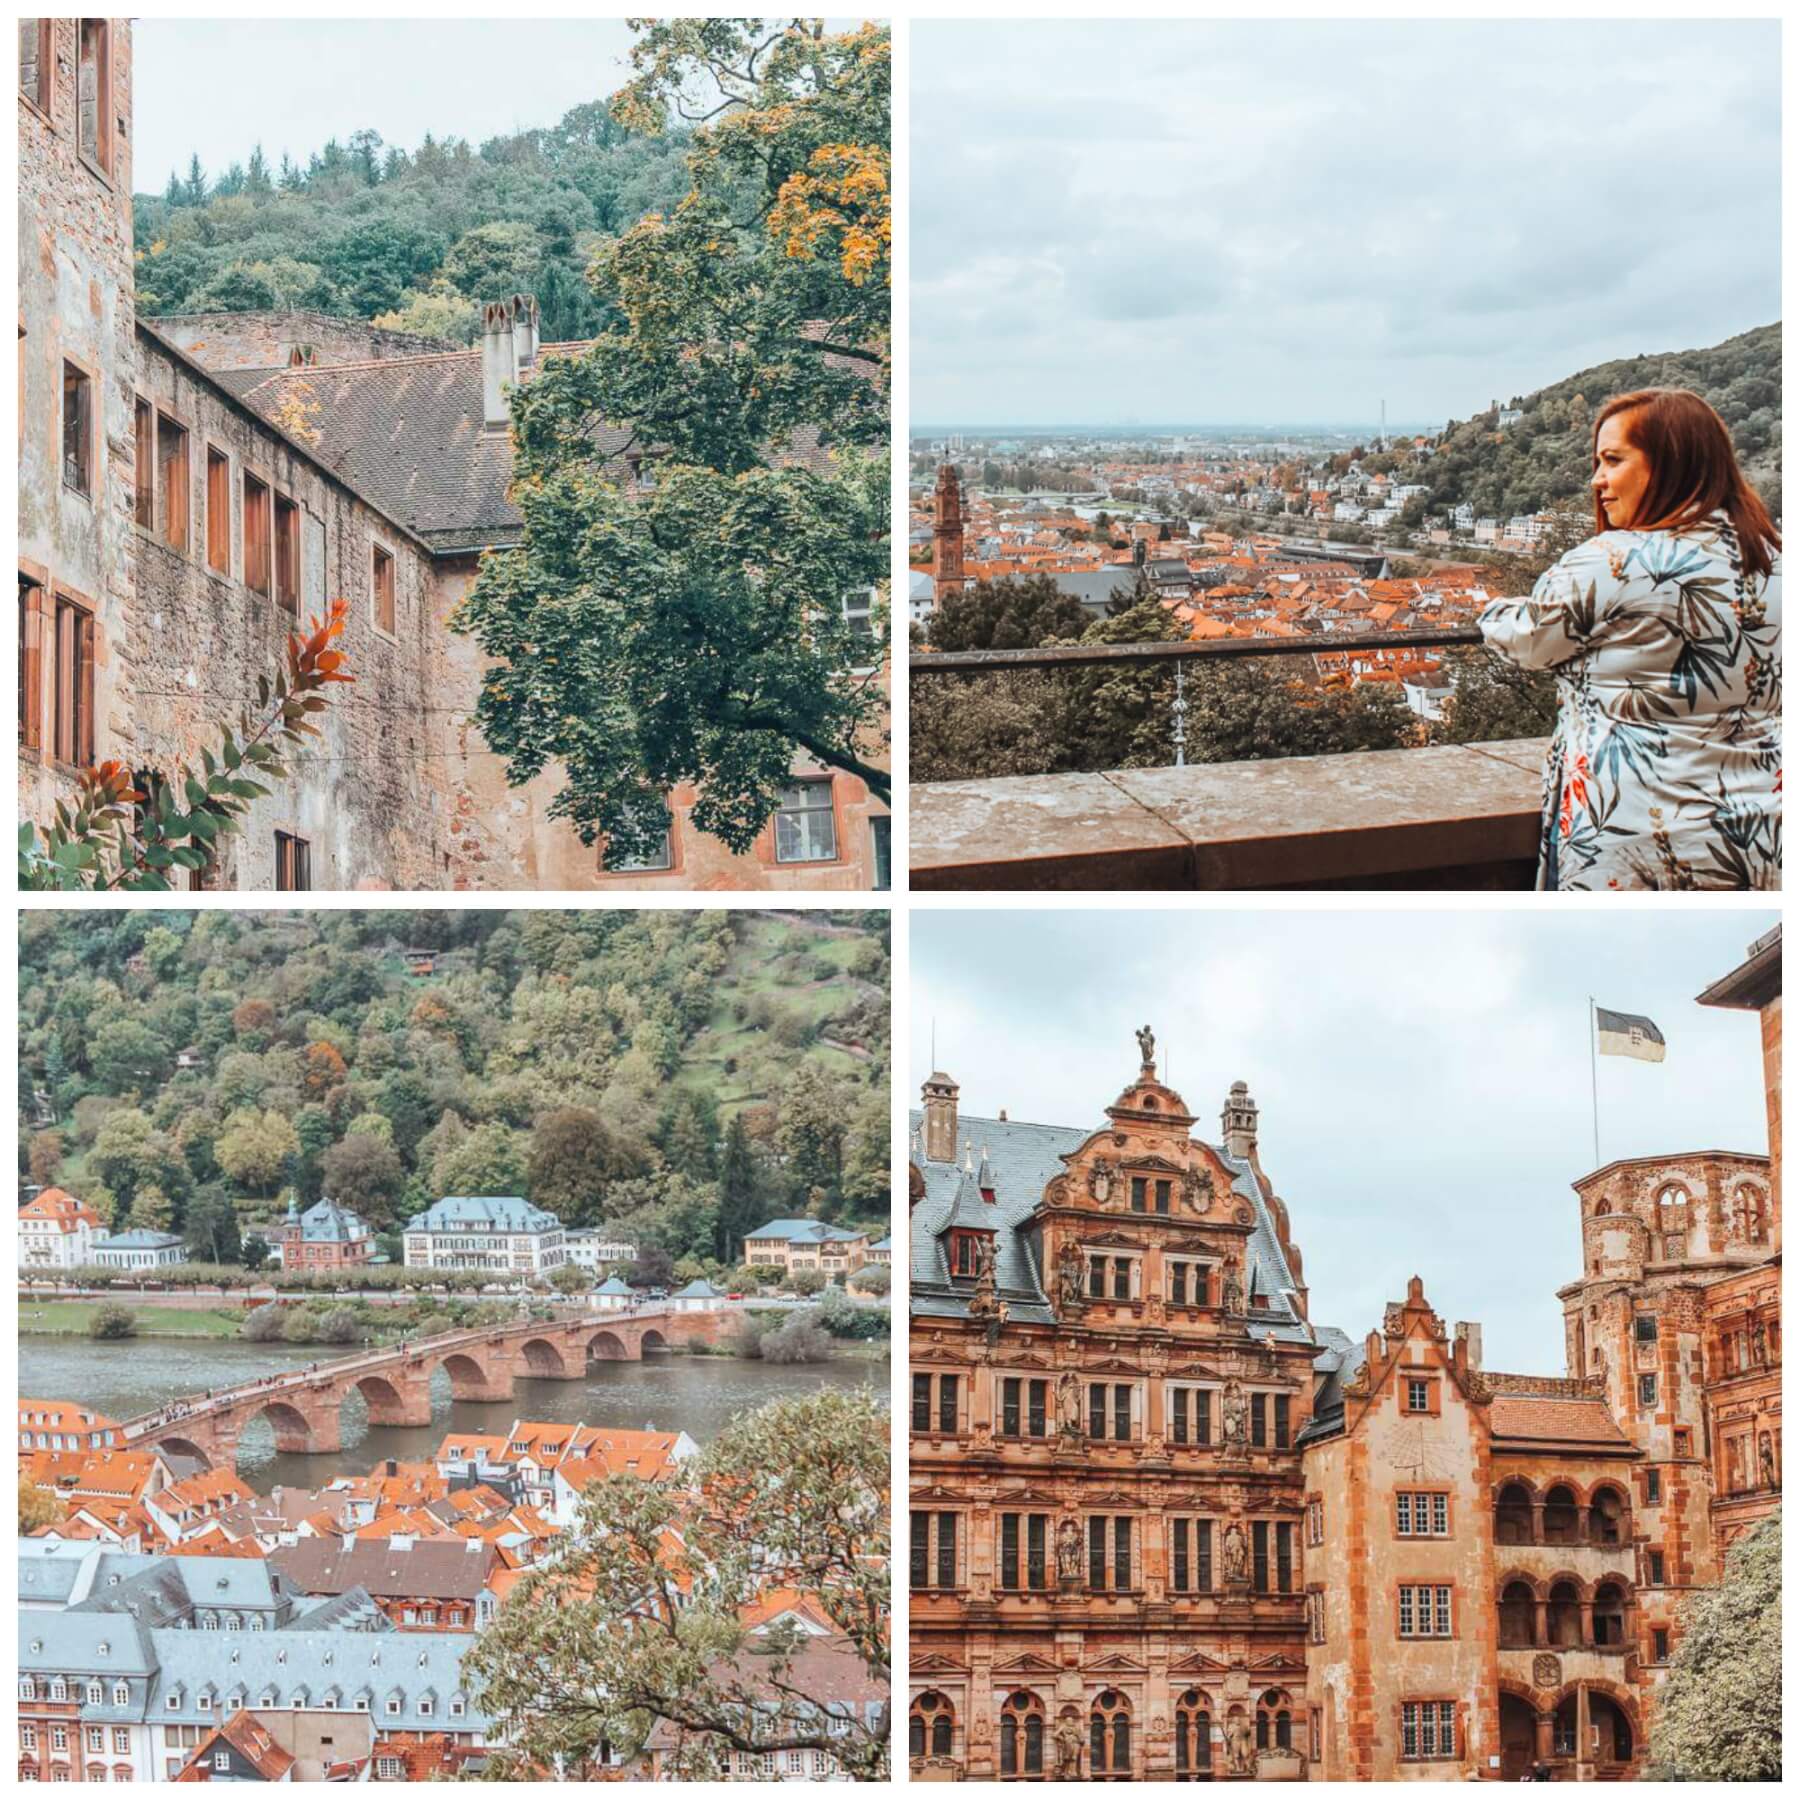 Collection of images from Heidelberg Germany